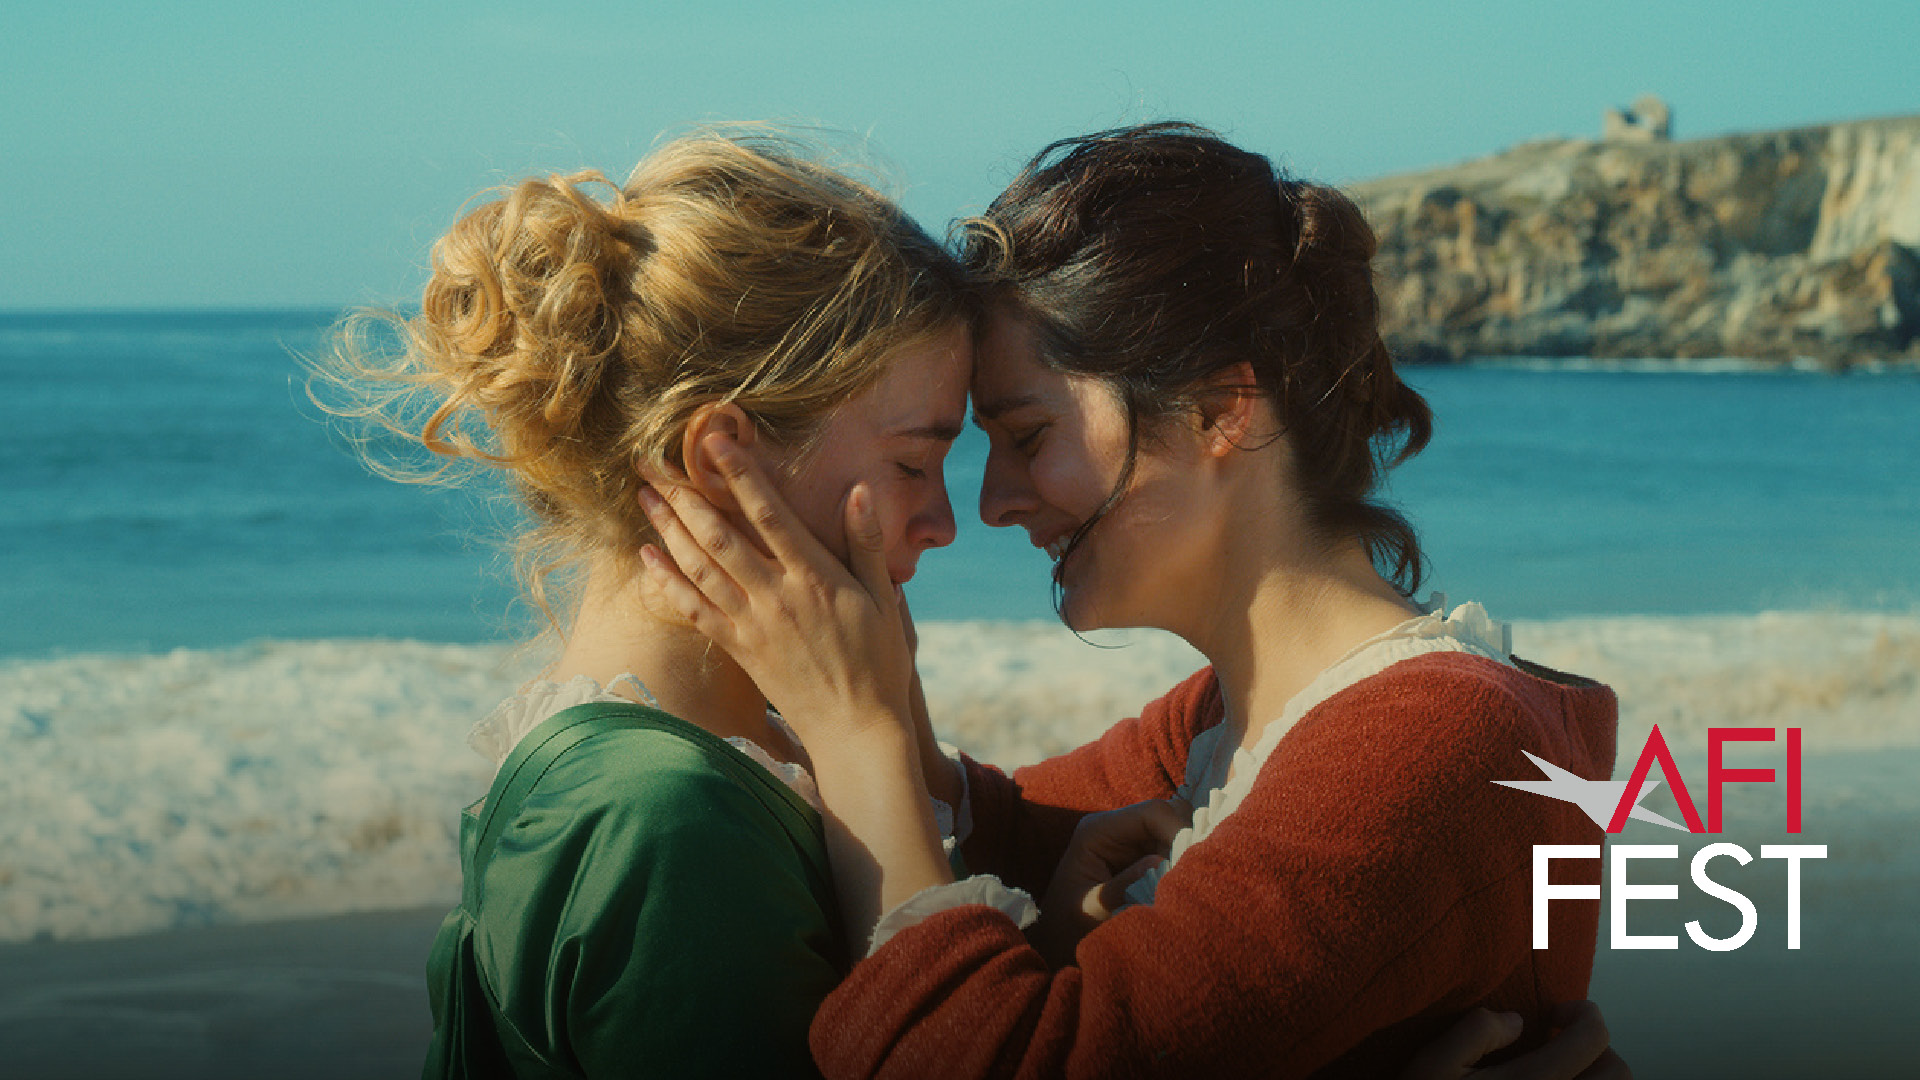 Pride Month Movie Guide - PORTRAIT OF A LADY ON FIRE – Marianne and Héloïse - still image from film